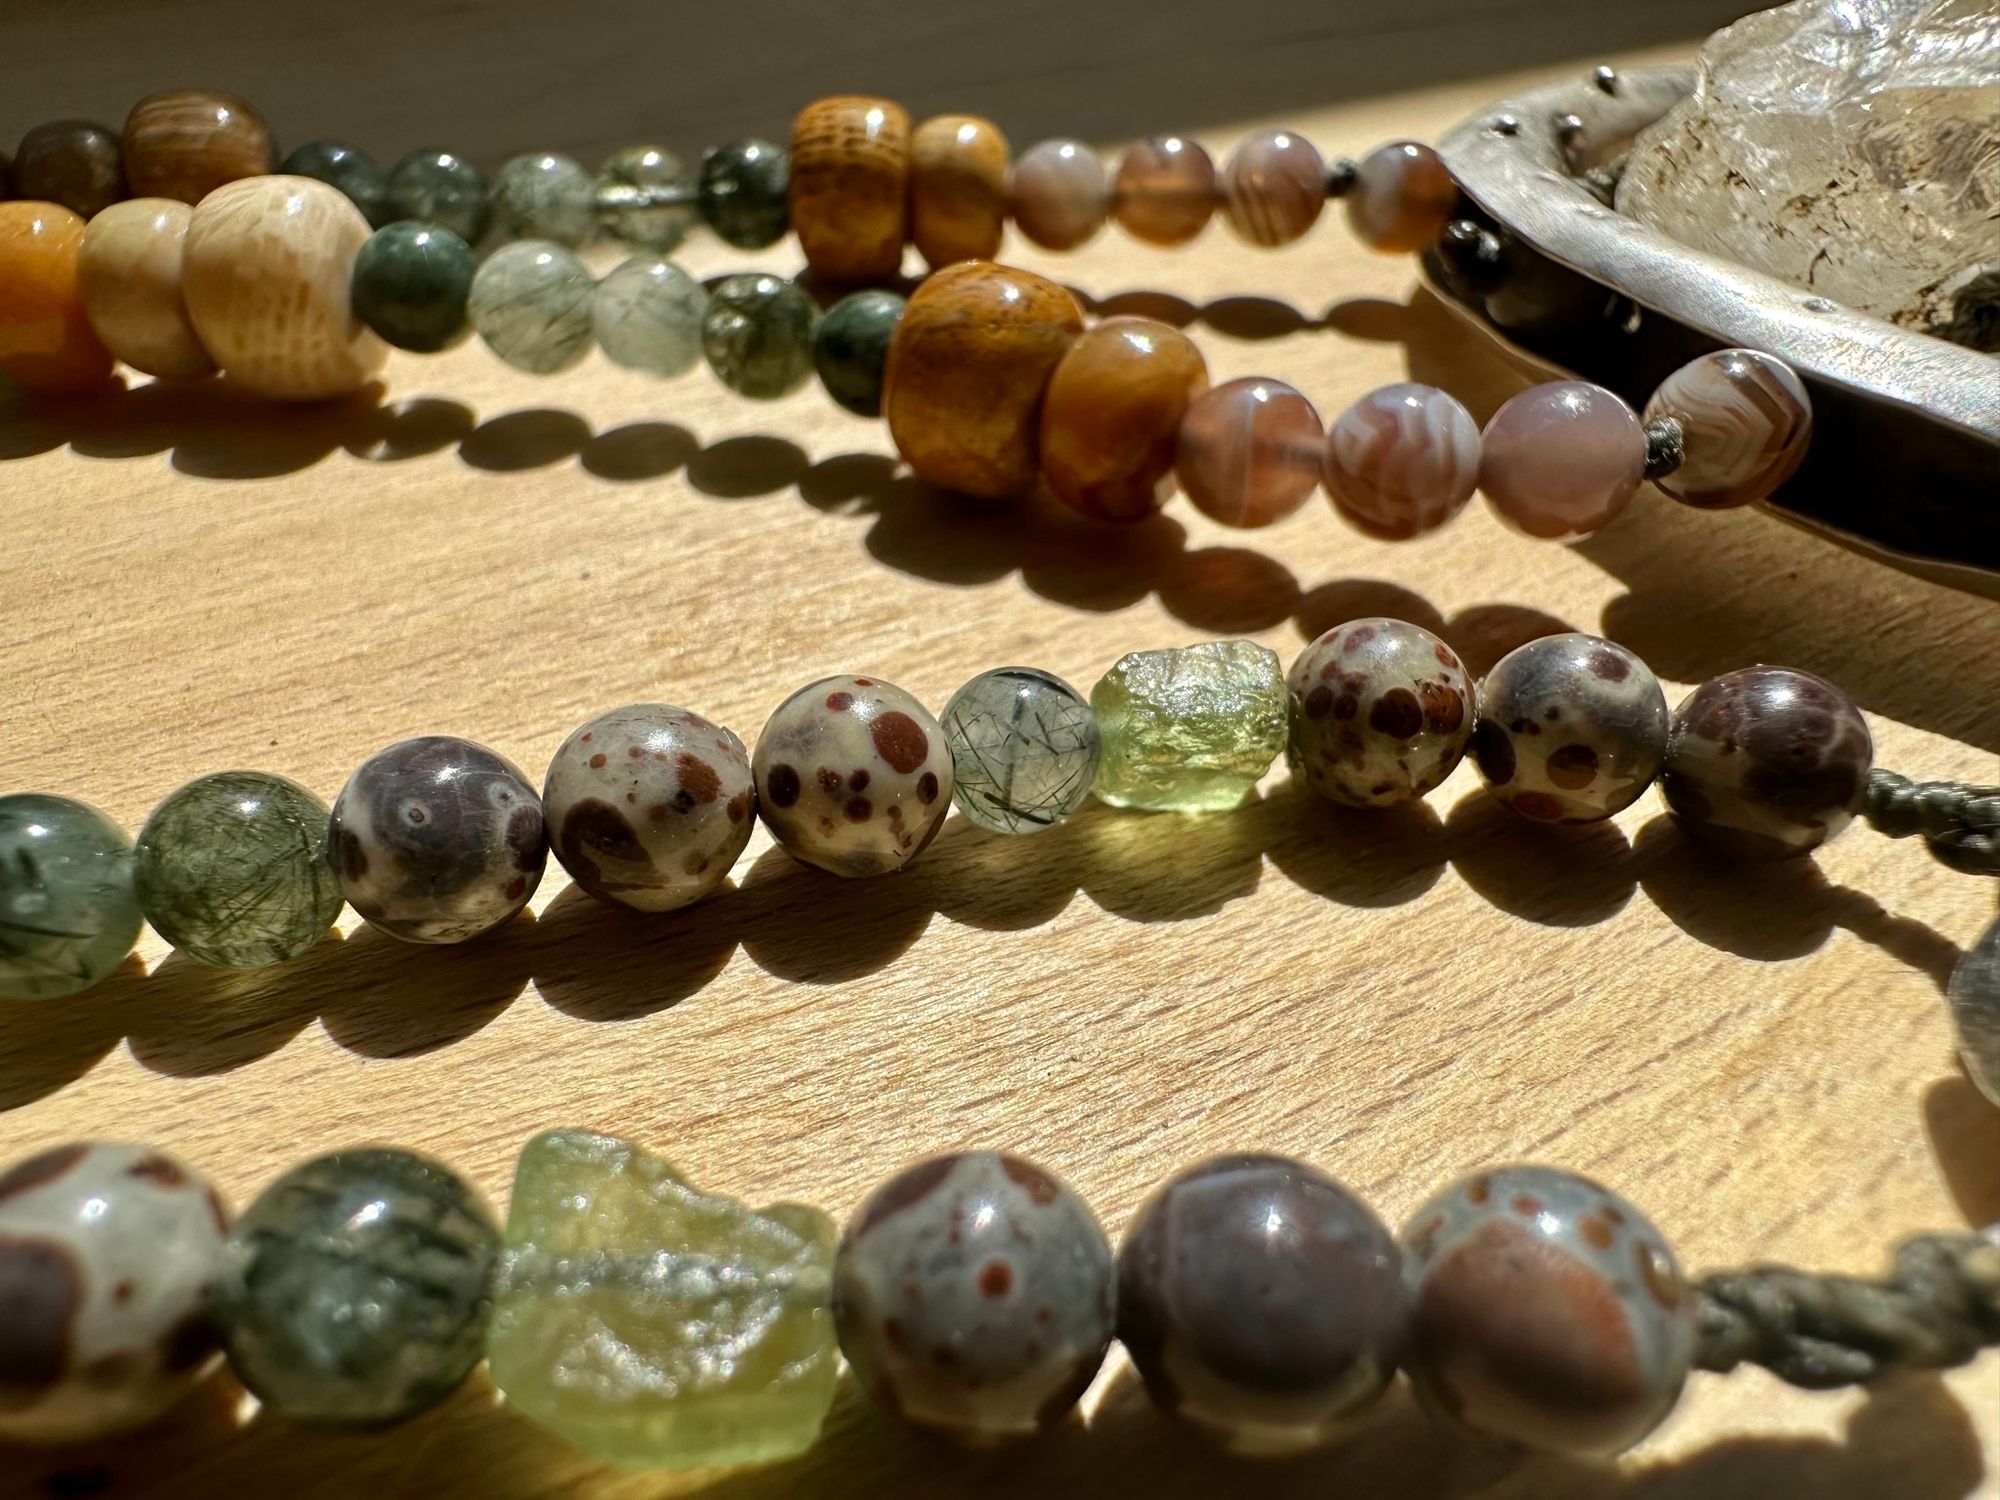 A necklace made of a silver moon, clear quartz crystal, earth-tone and green beads rests on a wood floor